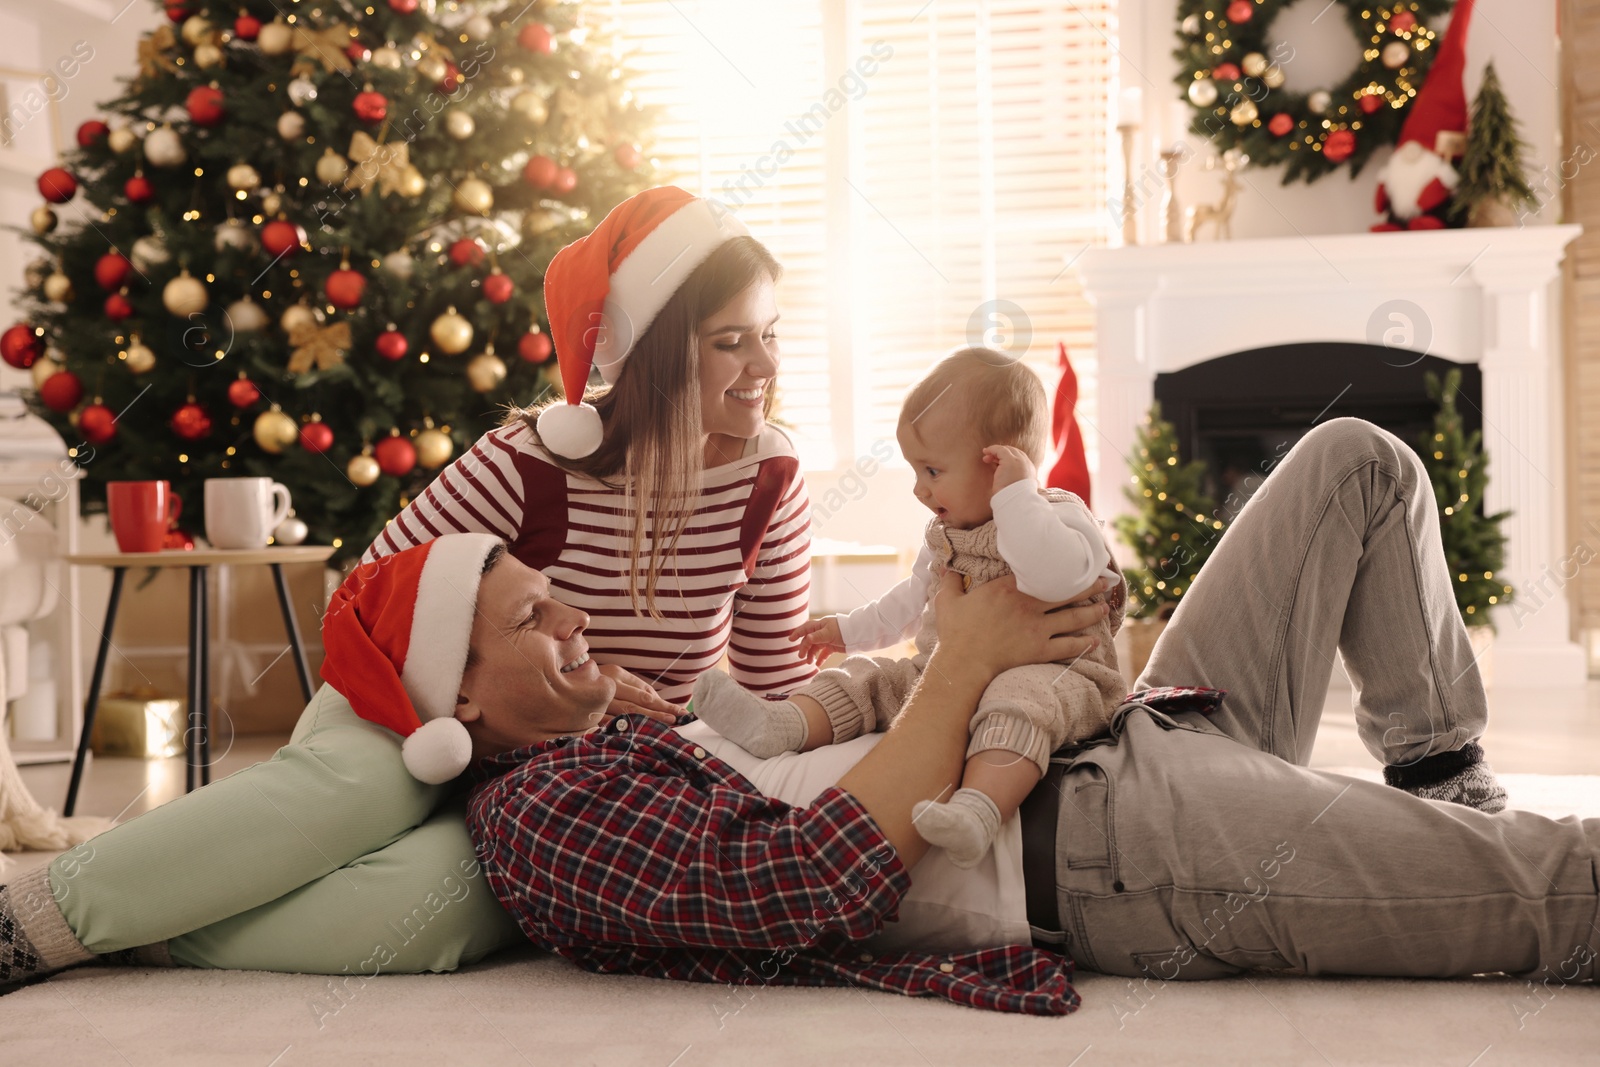 Photo of Happy family with cute baby on floor in room decorated for Christmas